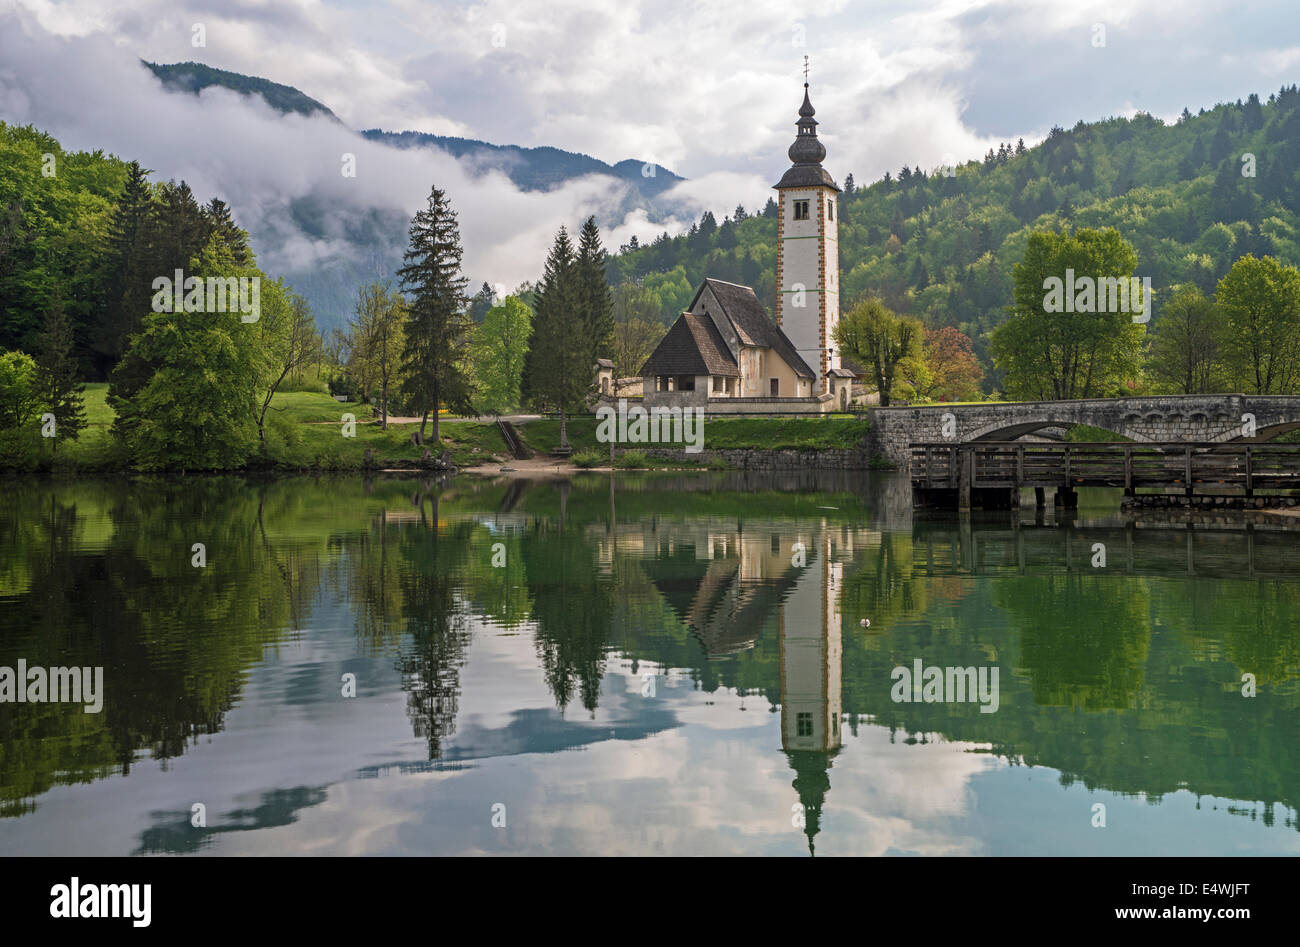 Church reflected in the calm waters of Lake Bohinj in Slovenia early one morning Stock Photo